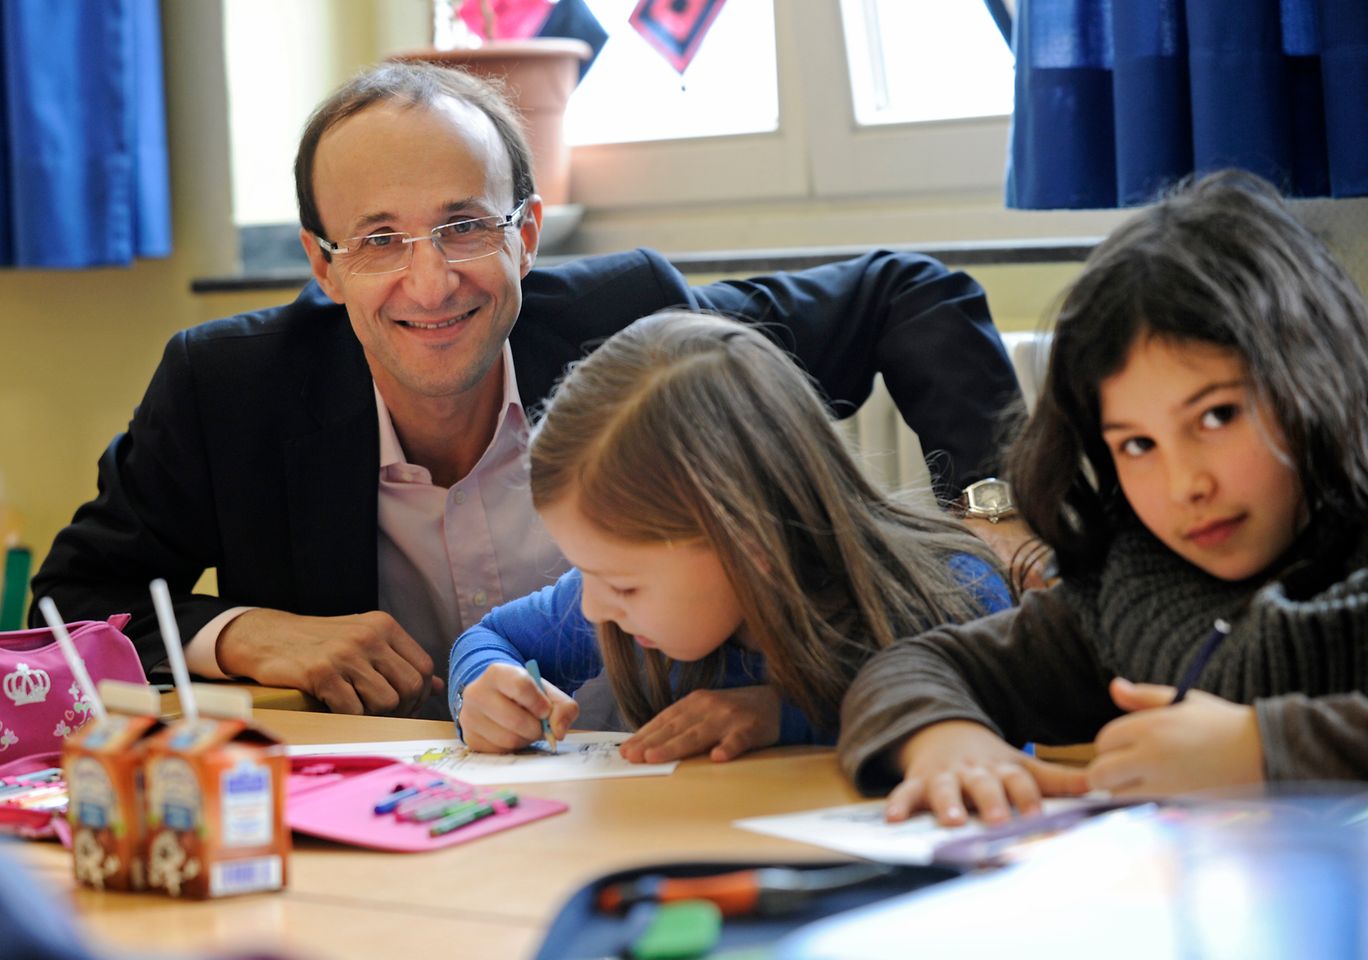 Bruno Piacenza conducts a lesson as sustainability ambassador.